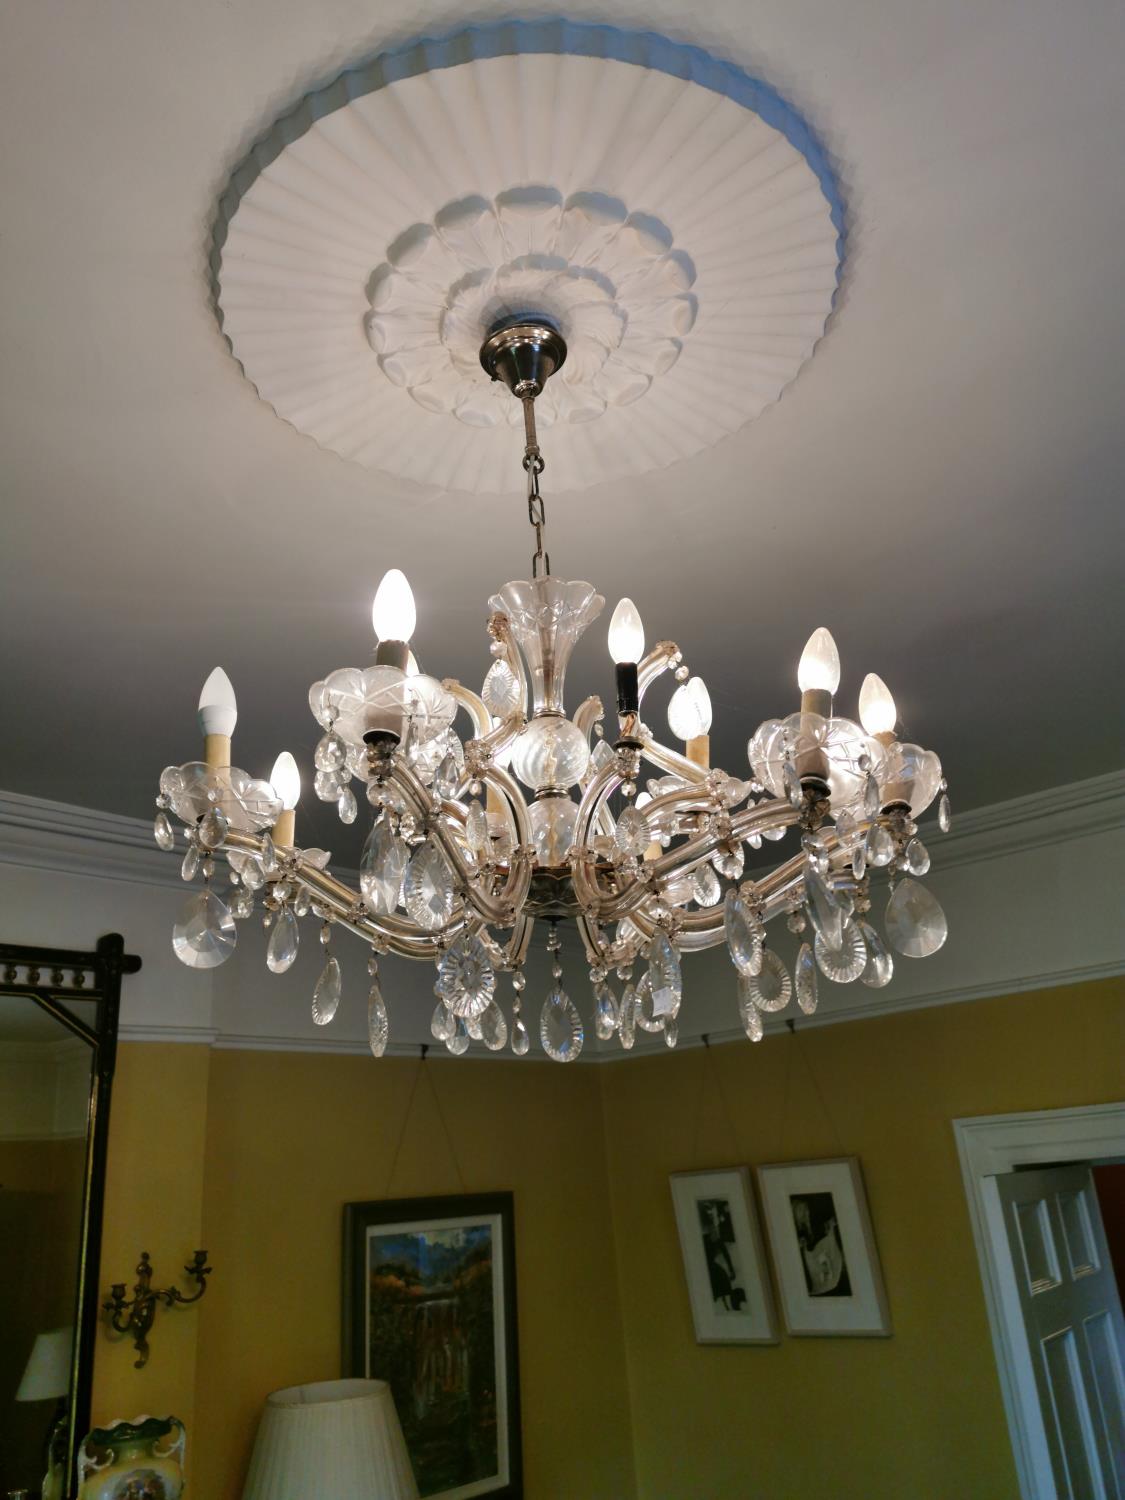 Good quality eight branch cut glass chandelier